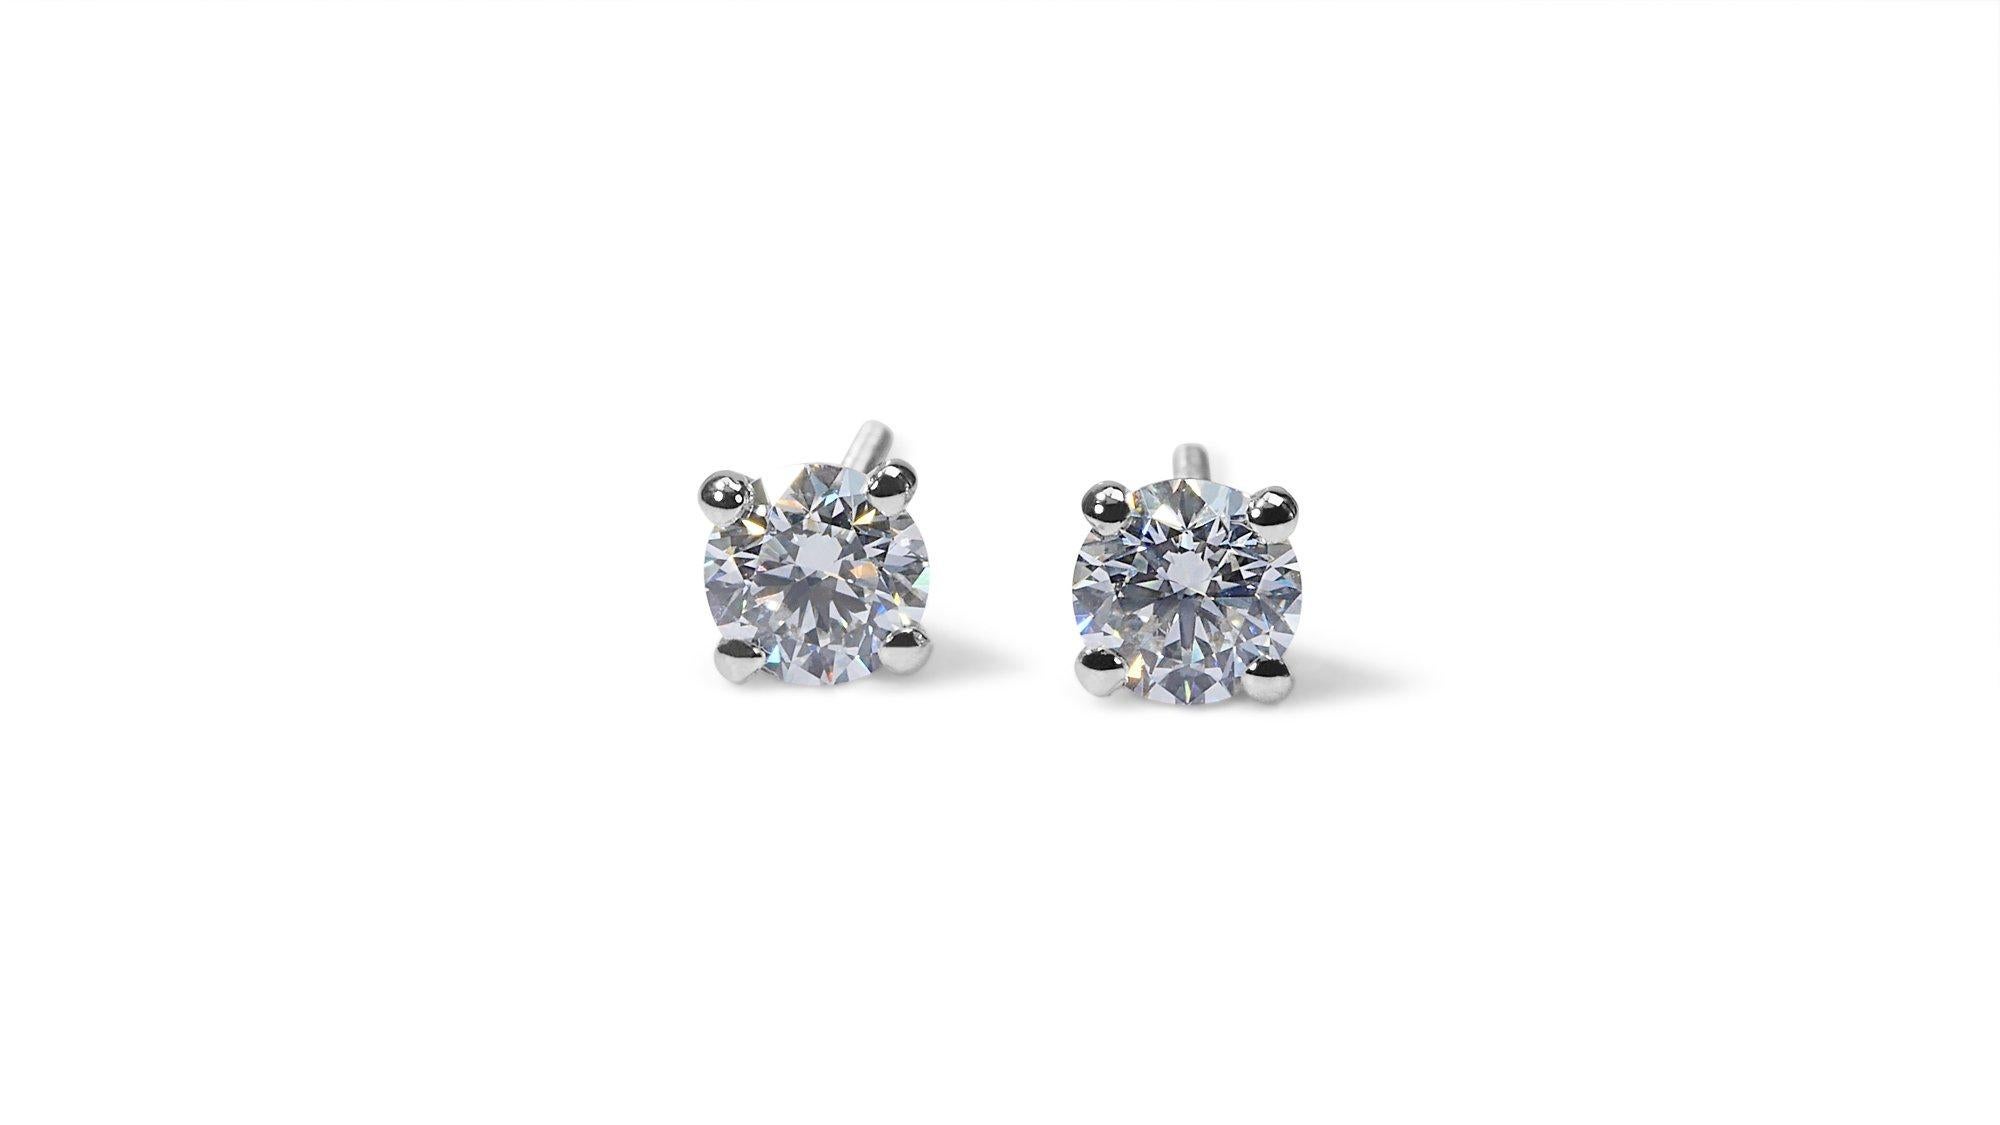 Exquisite 1.42ct Round Diamond Stud Earrings in 18k White Gold - GIA Certified For Sale 3